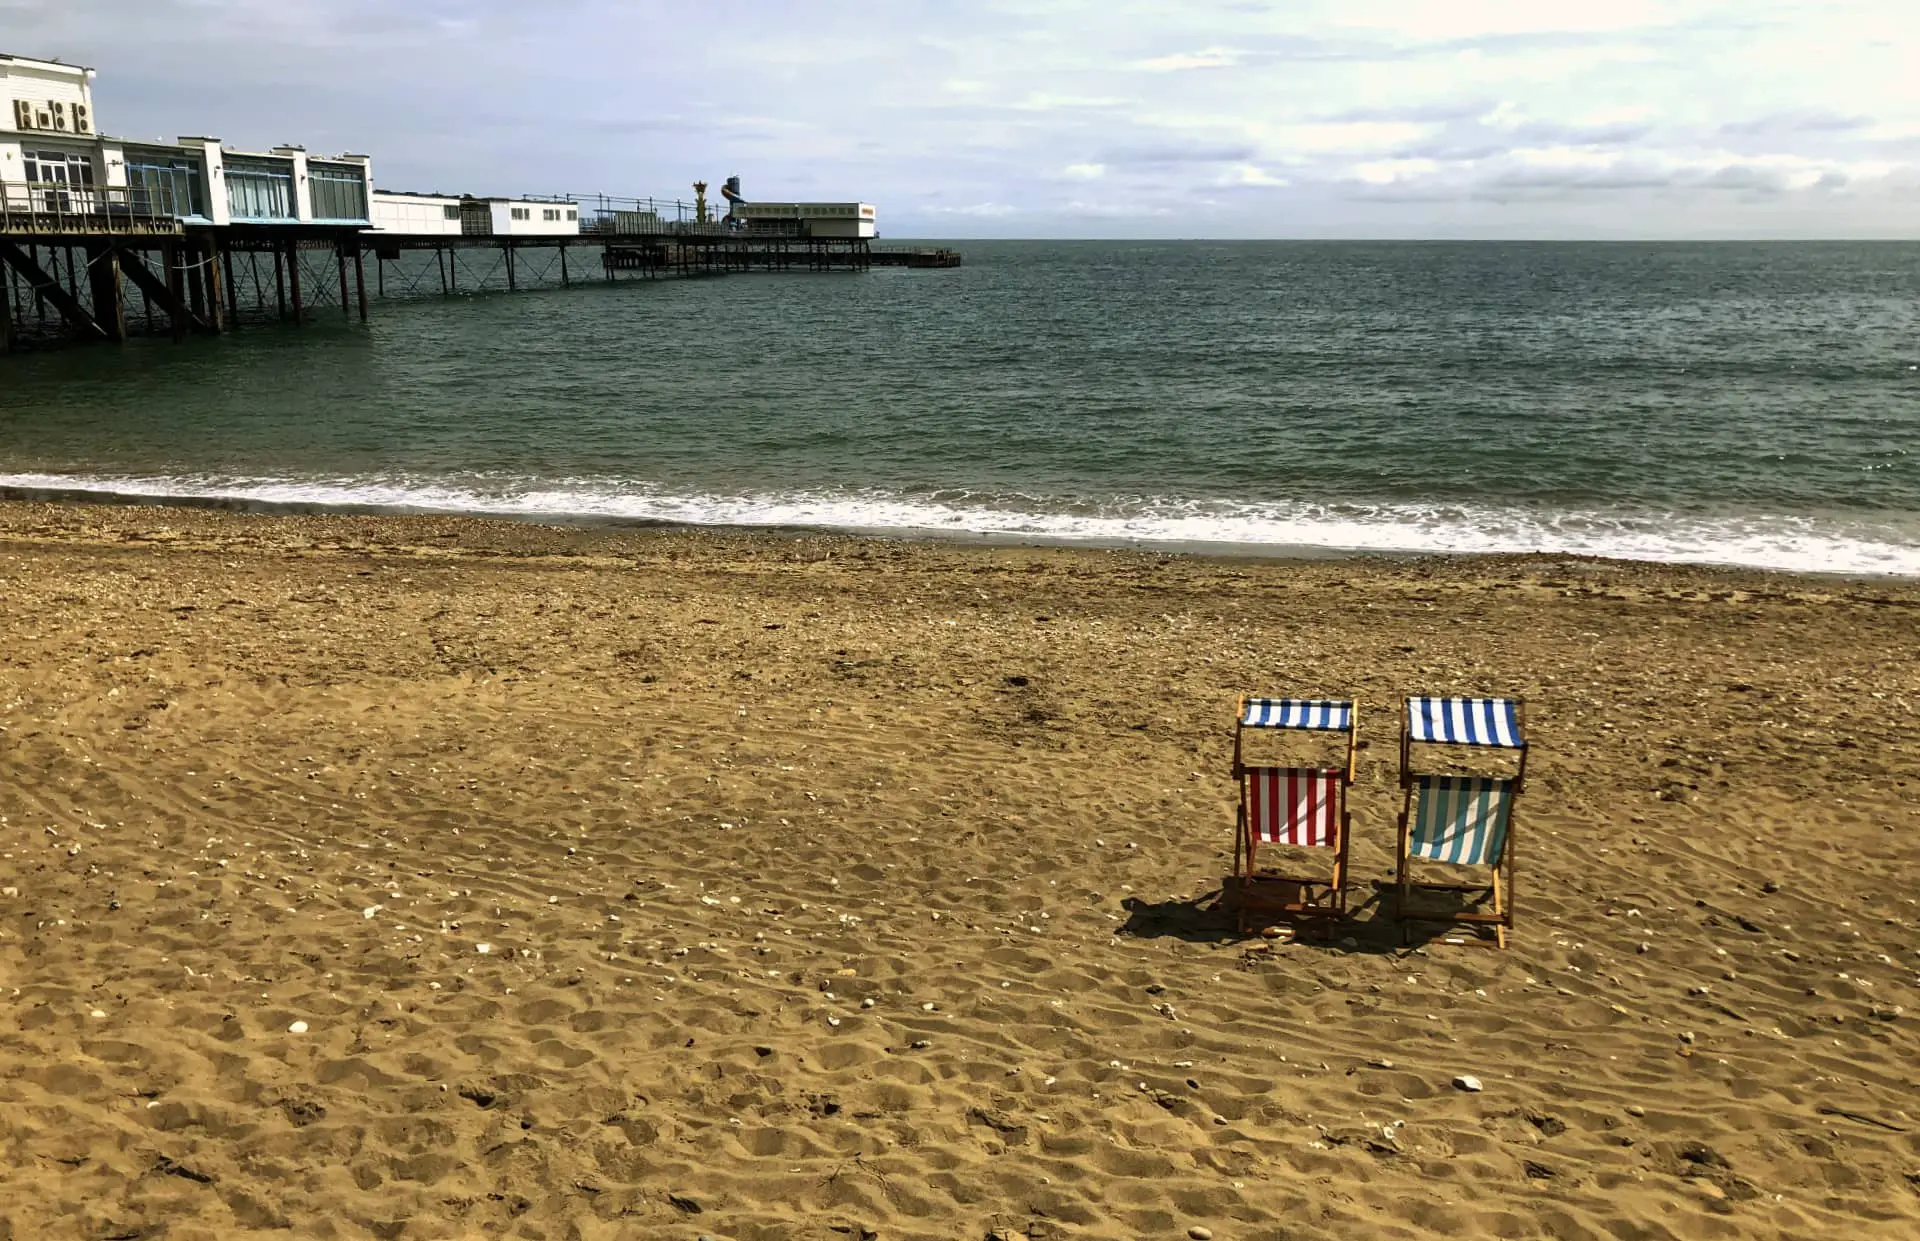 sandown beach with two deckchairs and pier in the background